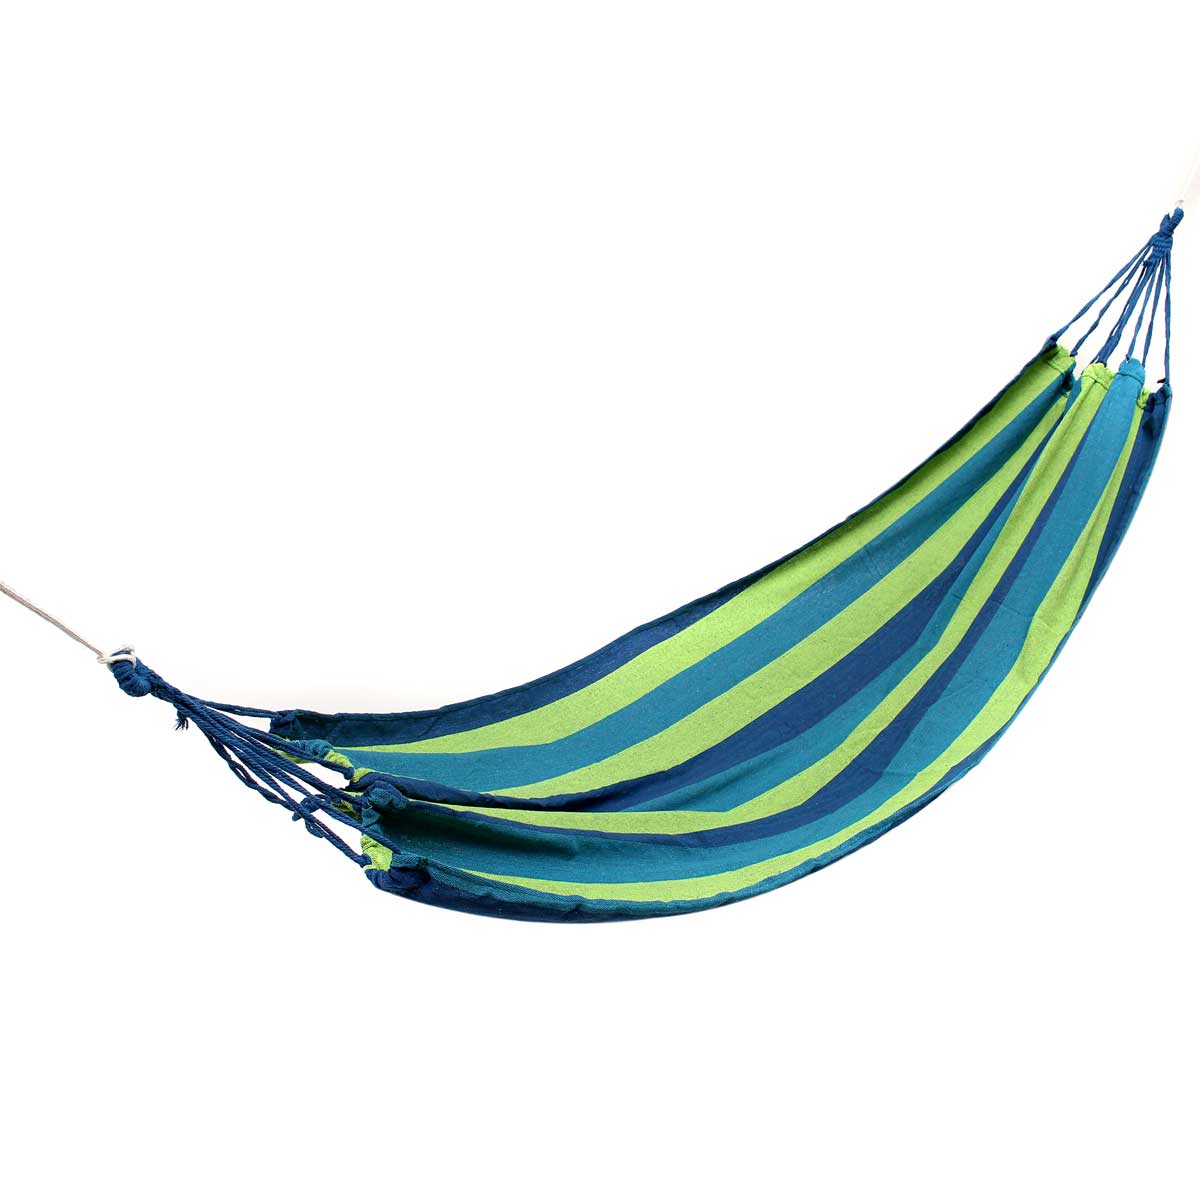 80 inch Portable Hammock with Carrying Bag, Travel Camping Hammock Bed Cotton Rope Hanging Chair Swing Seat For Indoor  Outdoor Yard Patio Porch Garden Hiking Backpacking - image 2 of 6